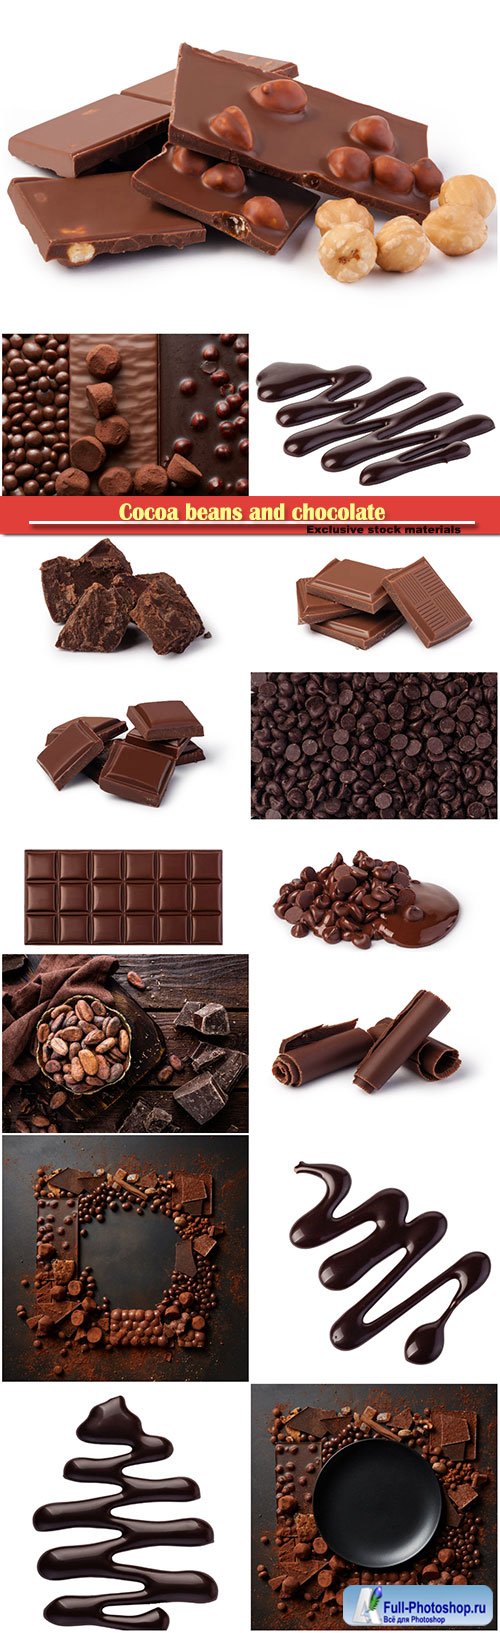 Cocoa beans and chocolate